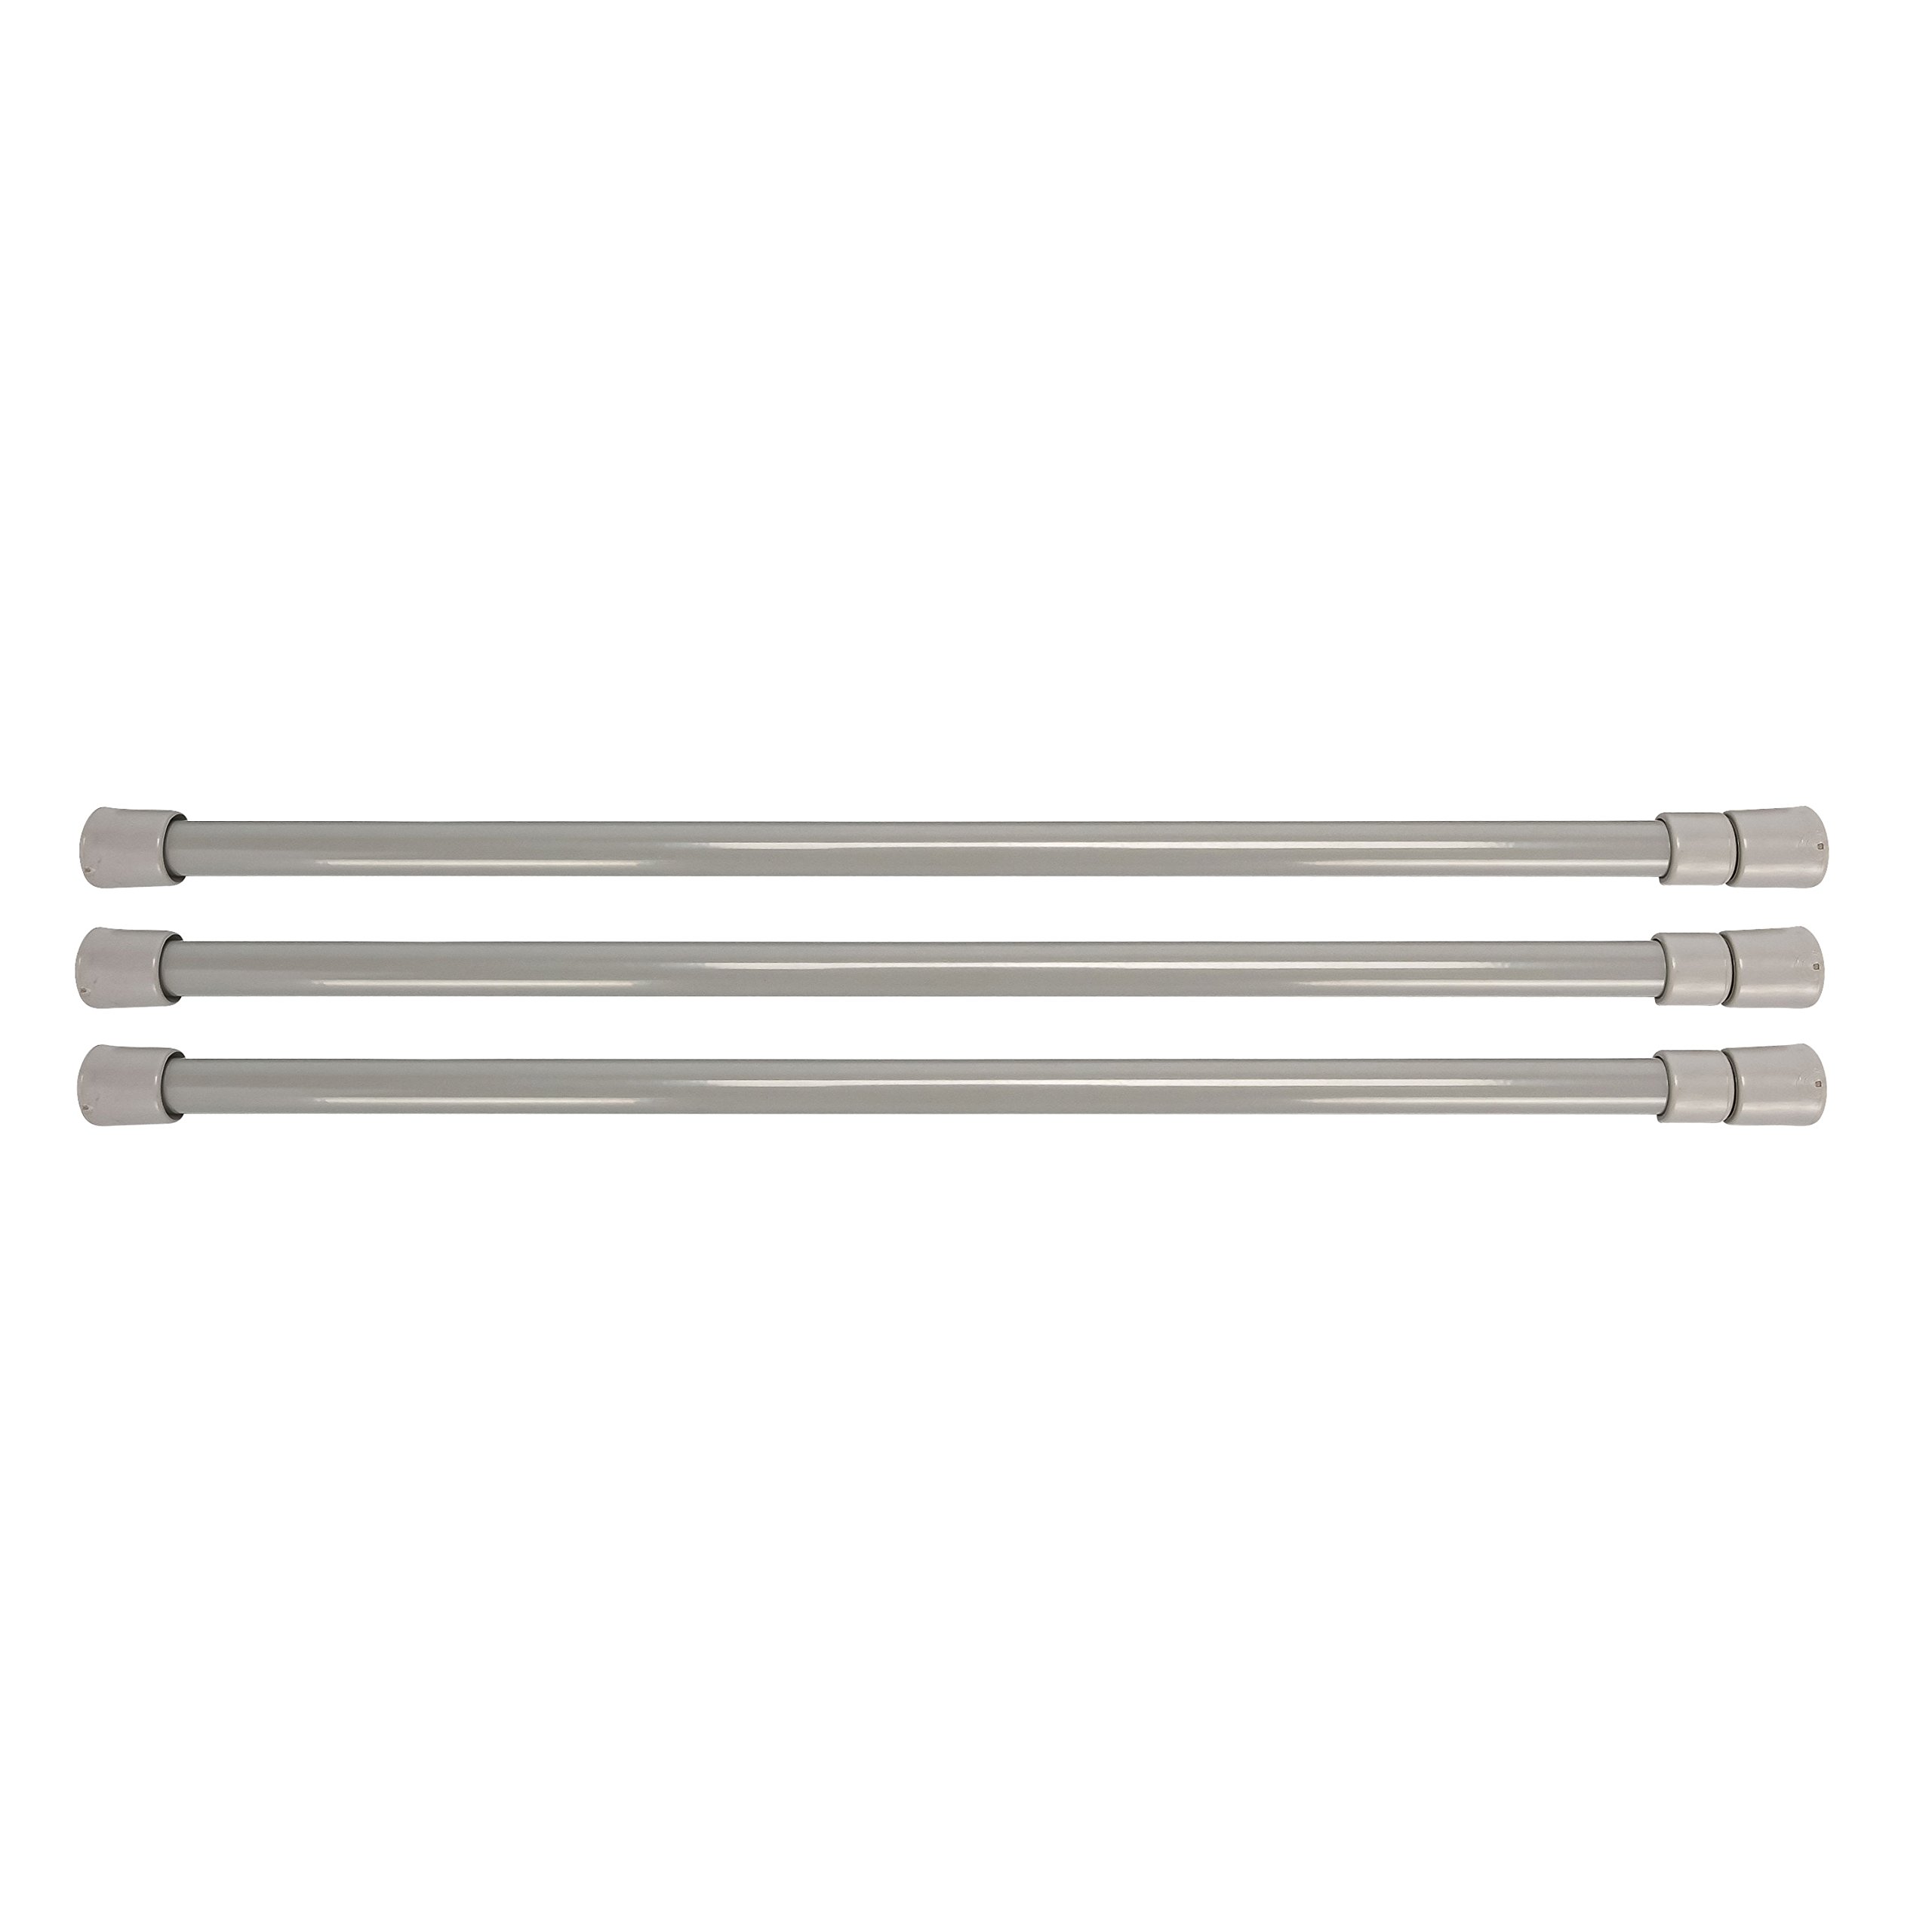 BAR  REFRIGERATOR  3PACK  16IN TO 28IN GRAY (E/F)